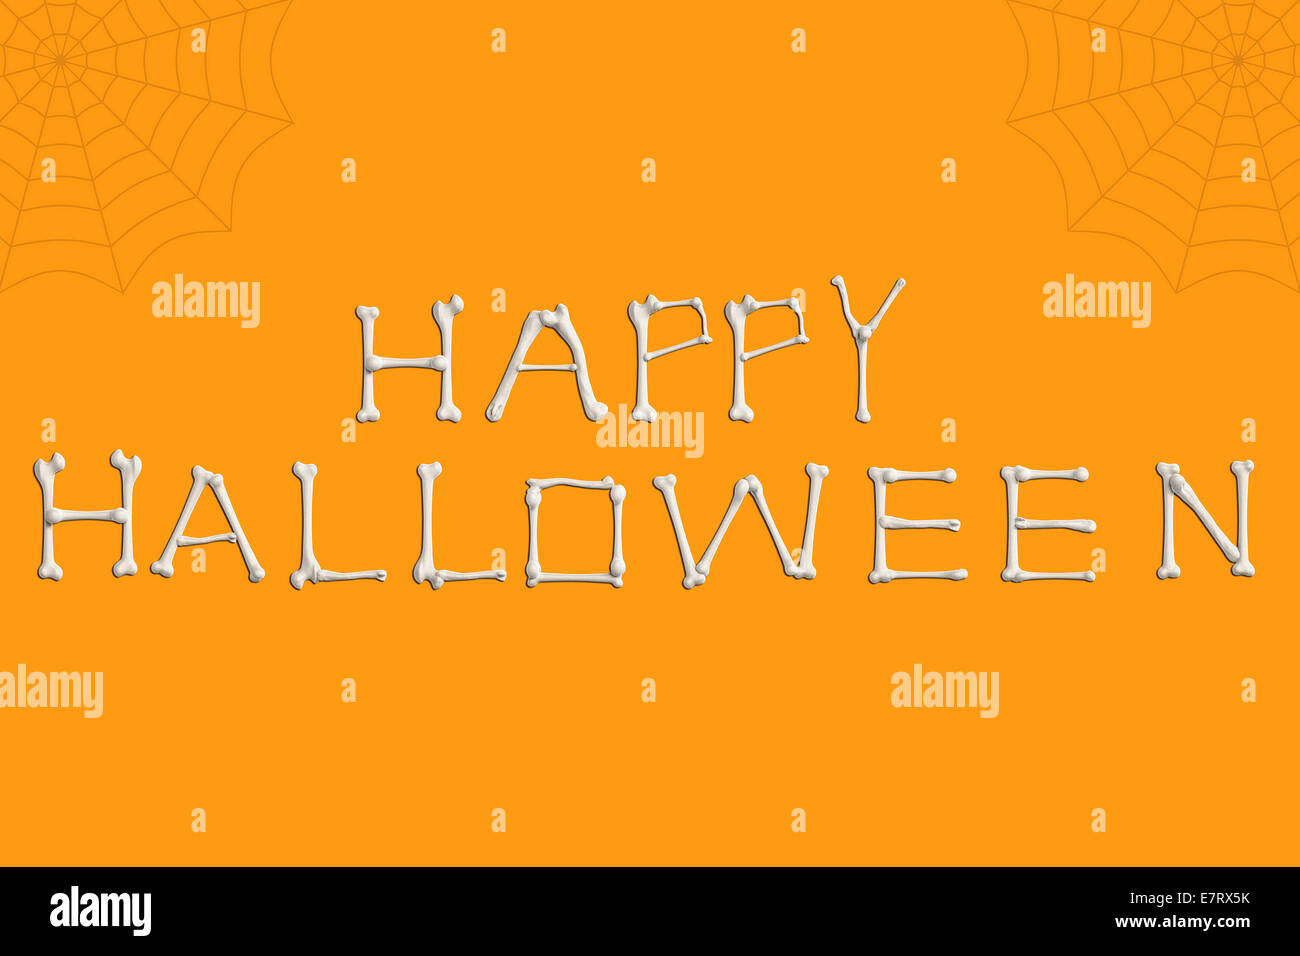 Text design element, Happy Halloween spelled out in bones on orange background with spider webs. Stock Photo